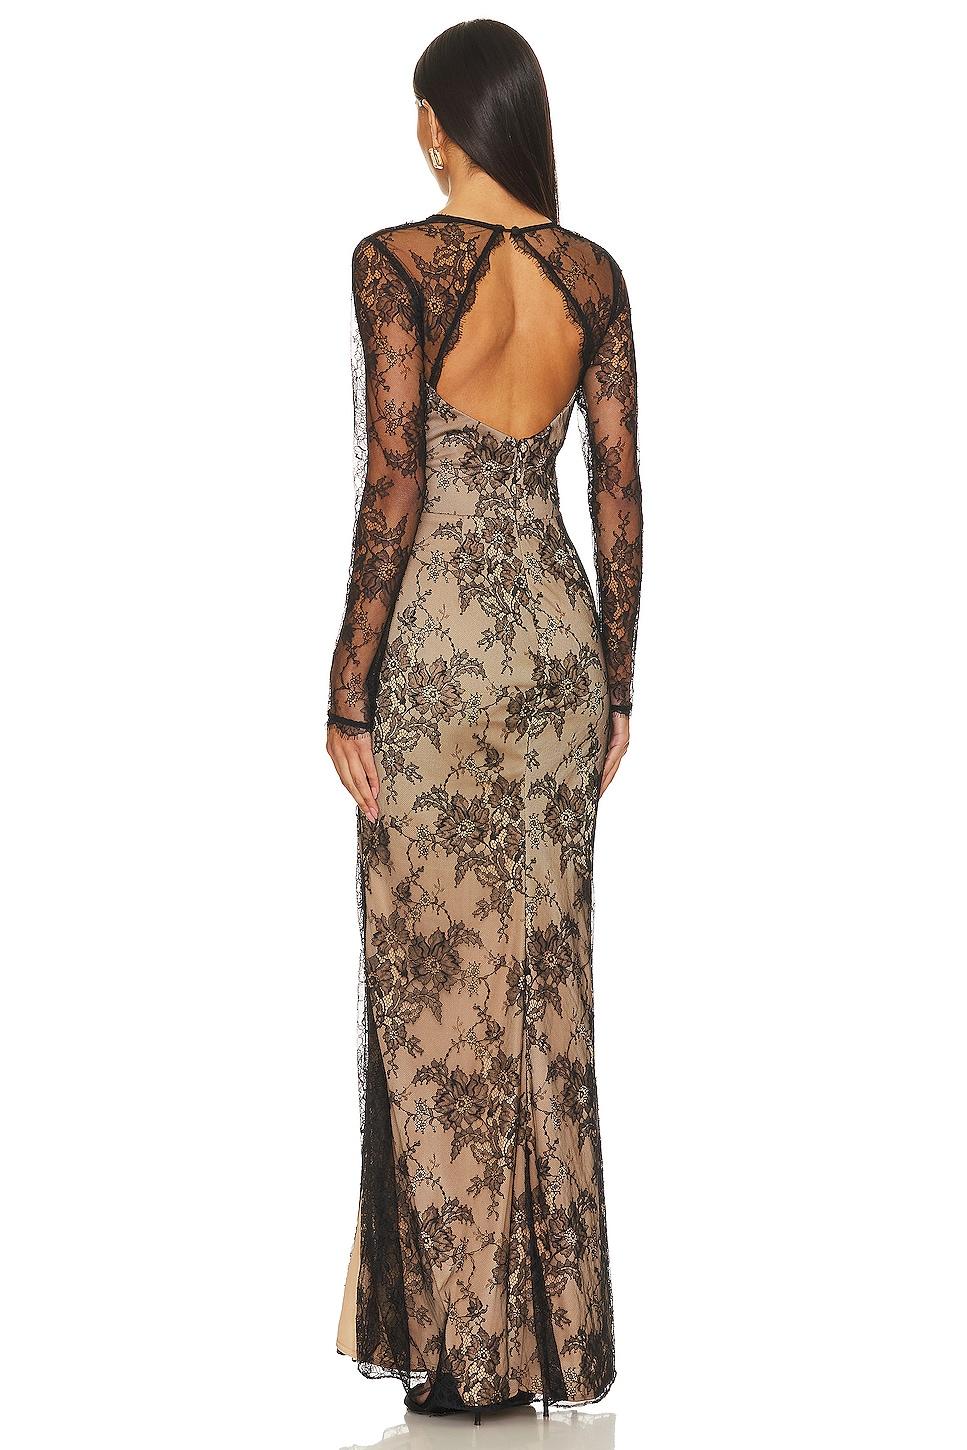 Katie May Persia Gown in Natural | Lyst